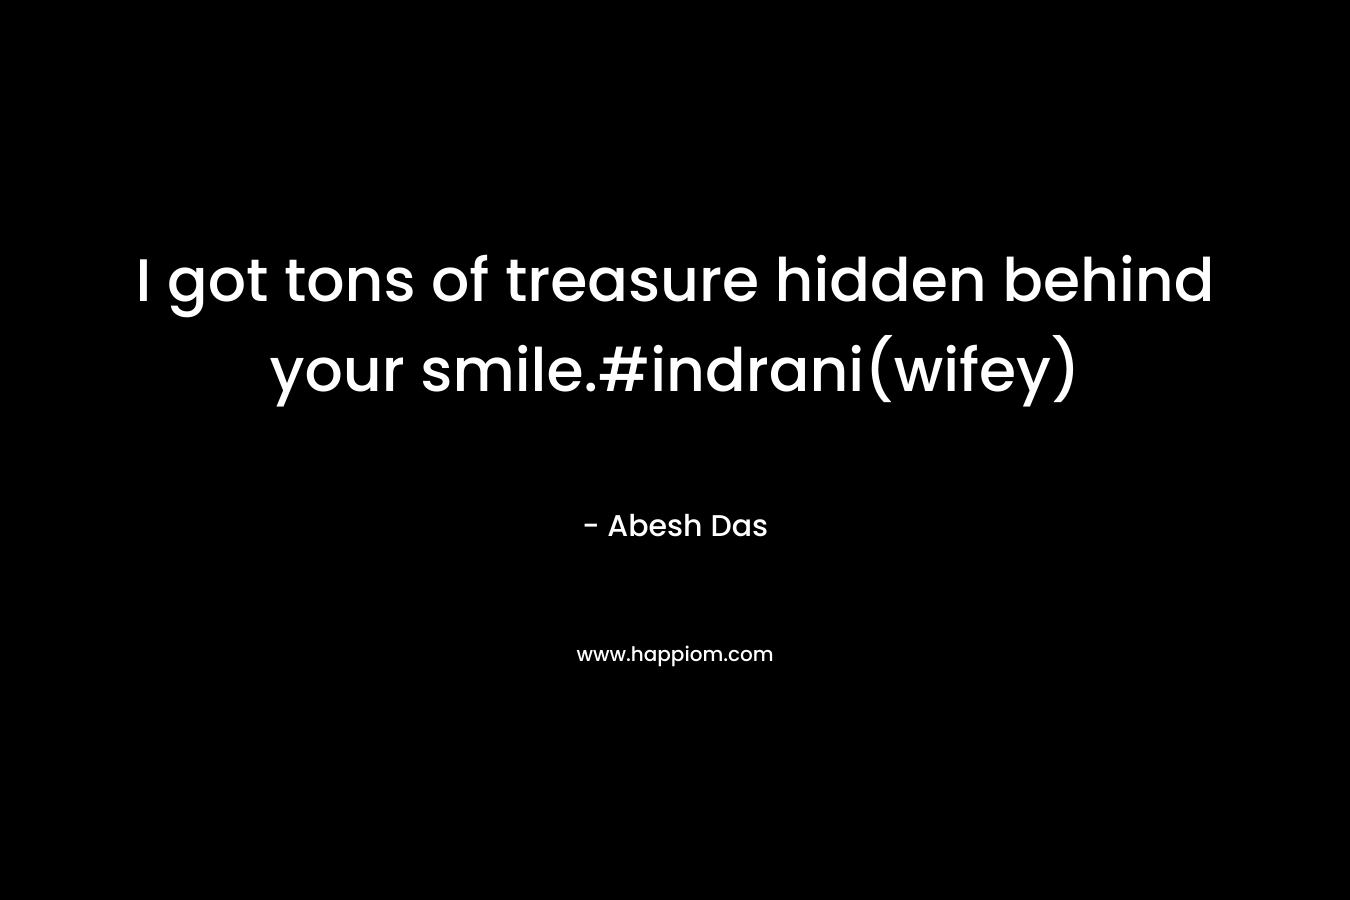 I got tons of treasure hidden behind your smile.#indrani(wifey)